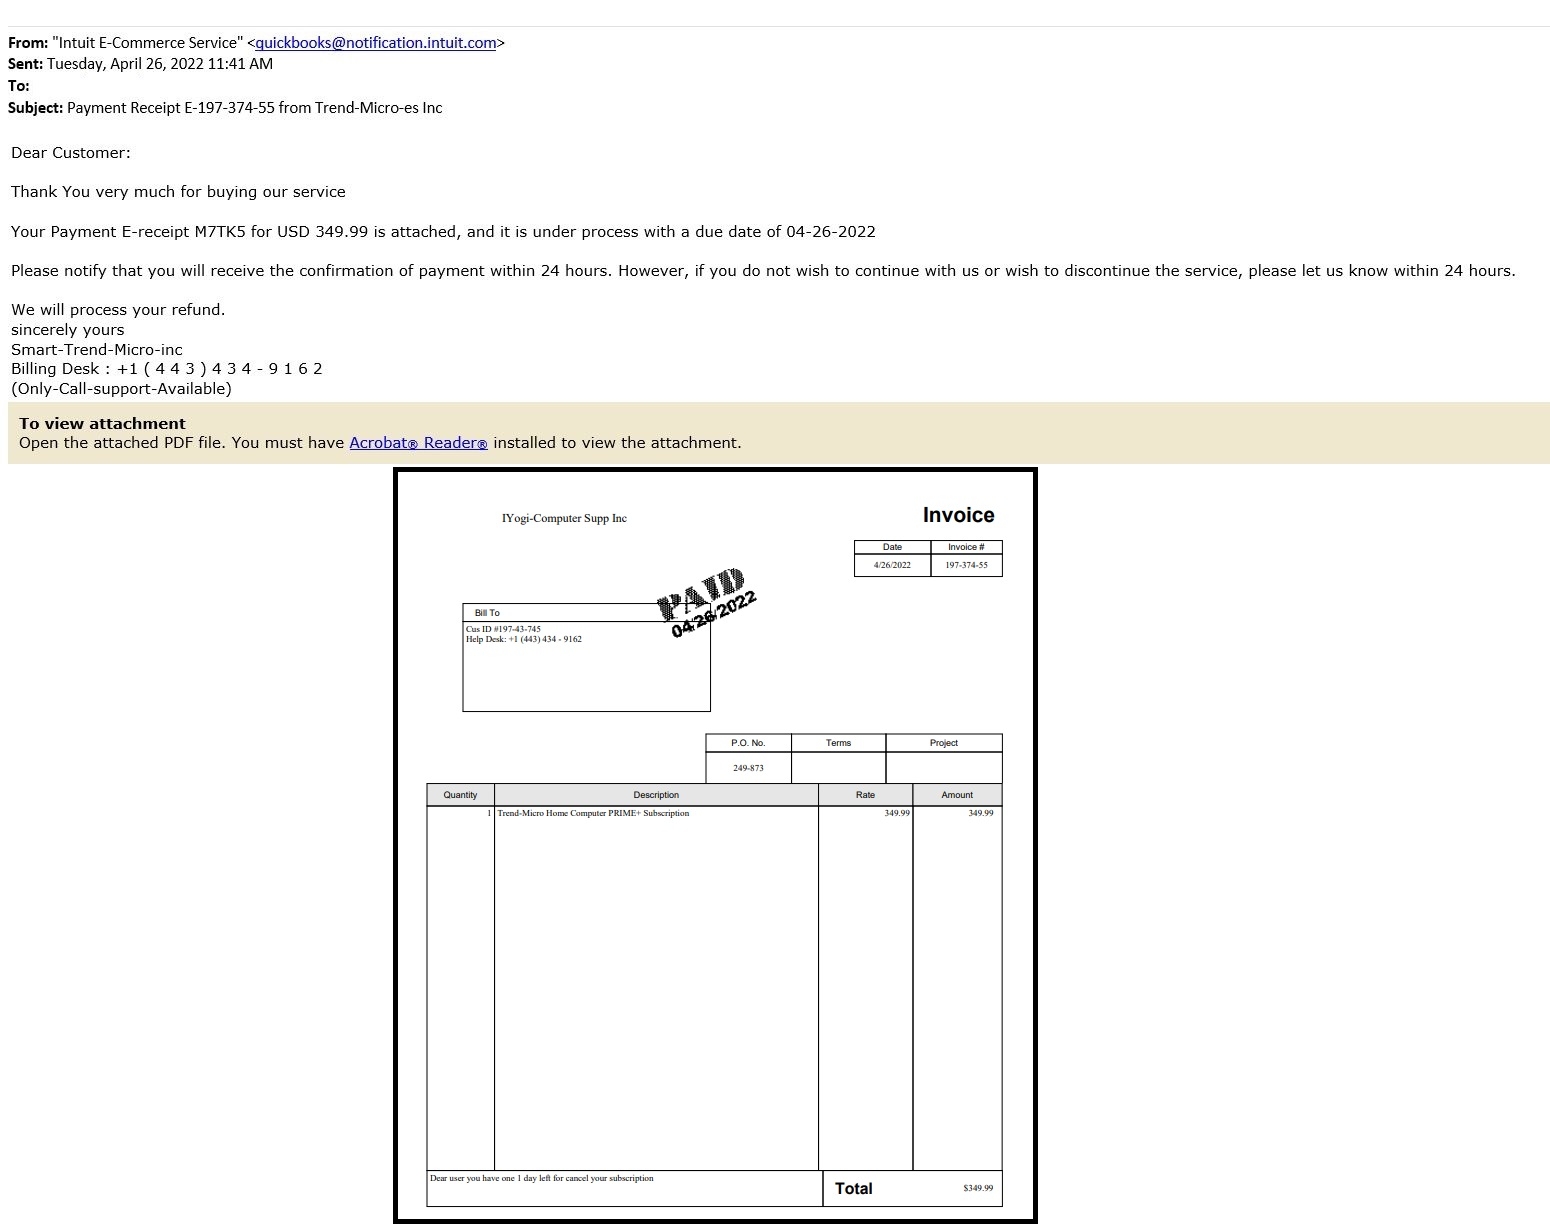 Trend Micro Fake Email Reported April 2022 Sample 2